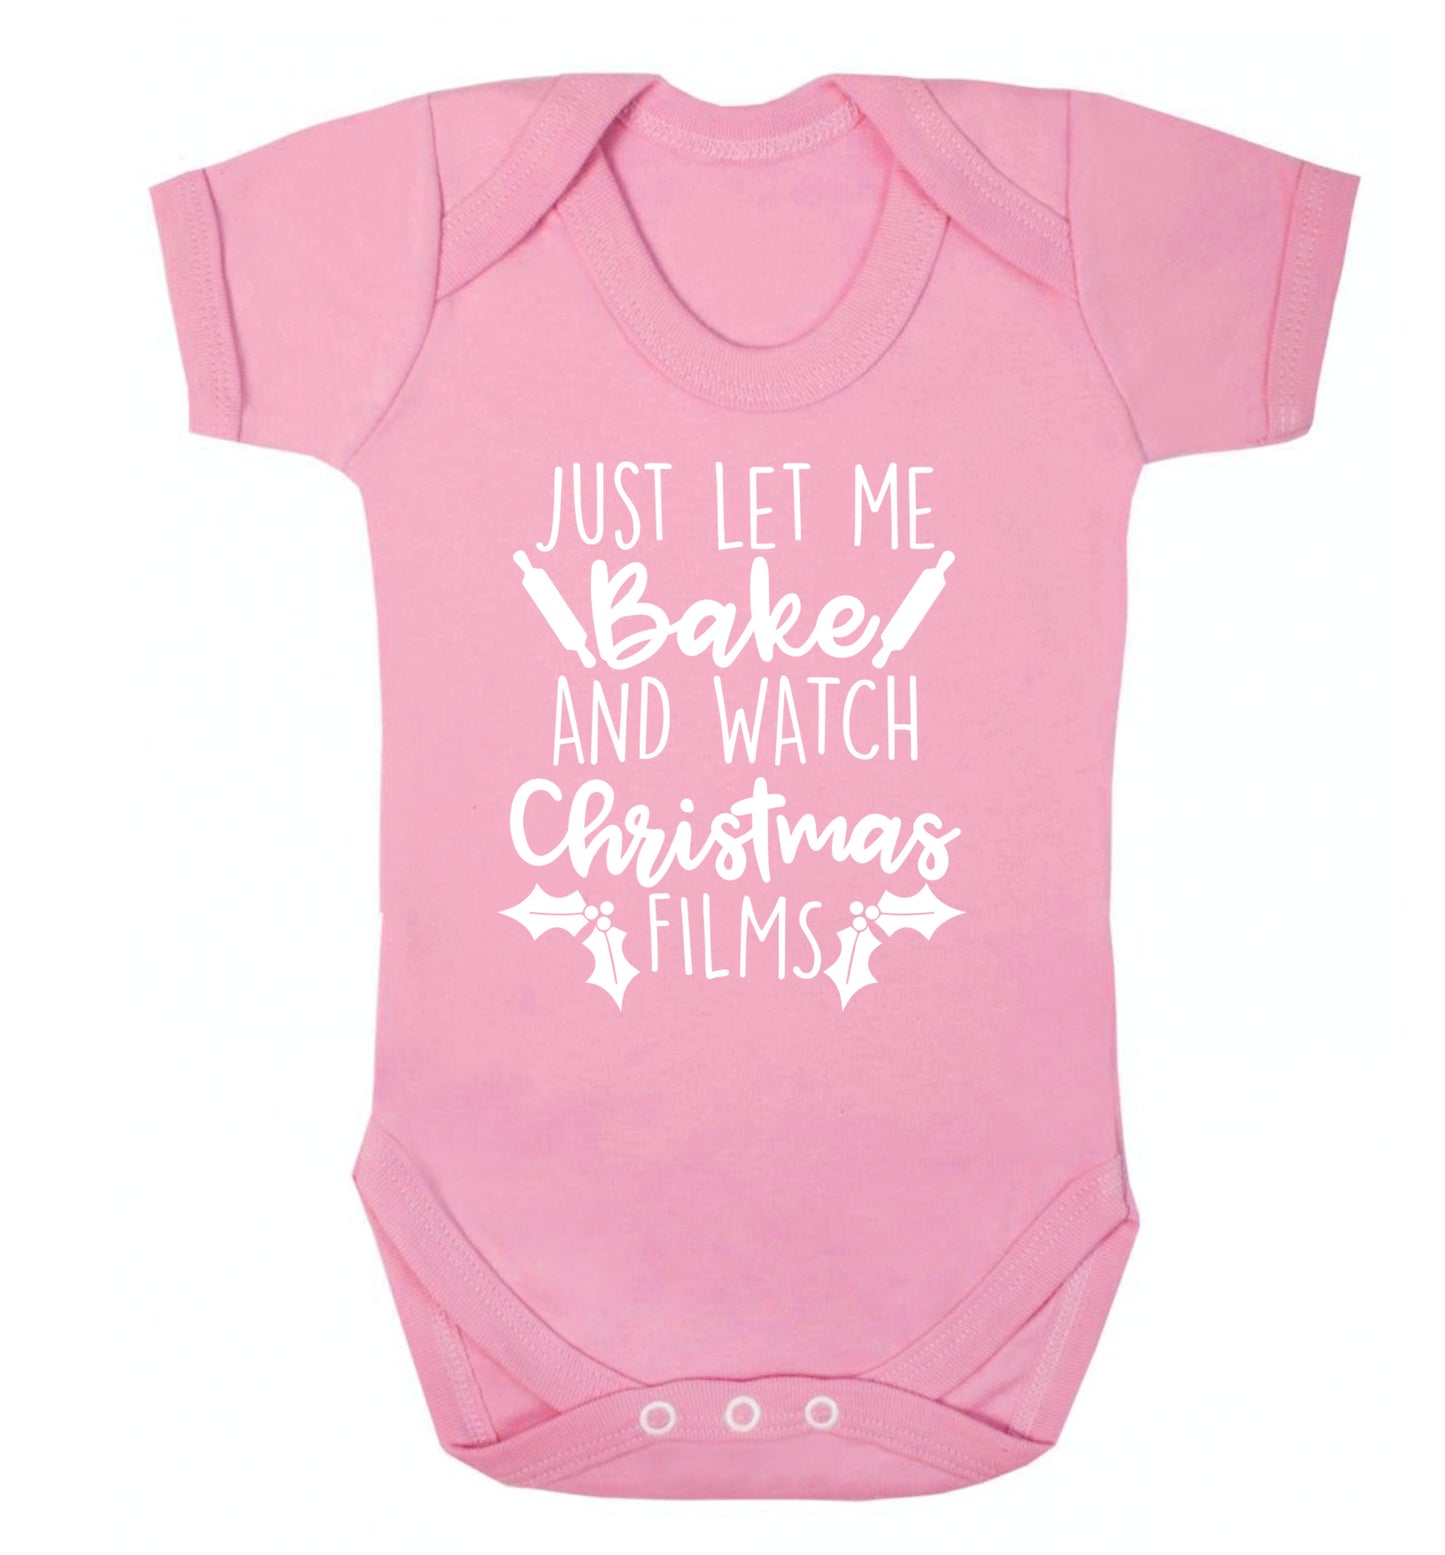 Just let me bake and watch Christmas films Baby Vest pale pink 18-24 months